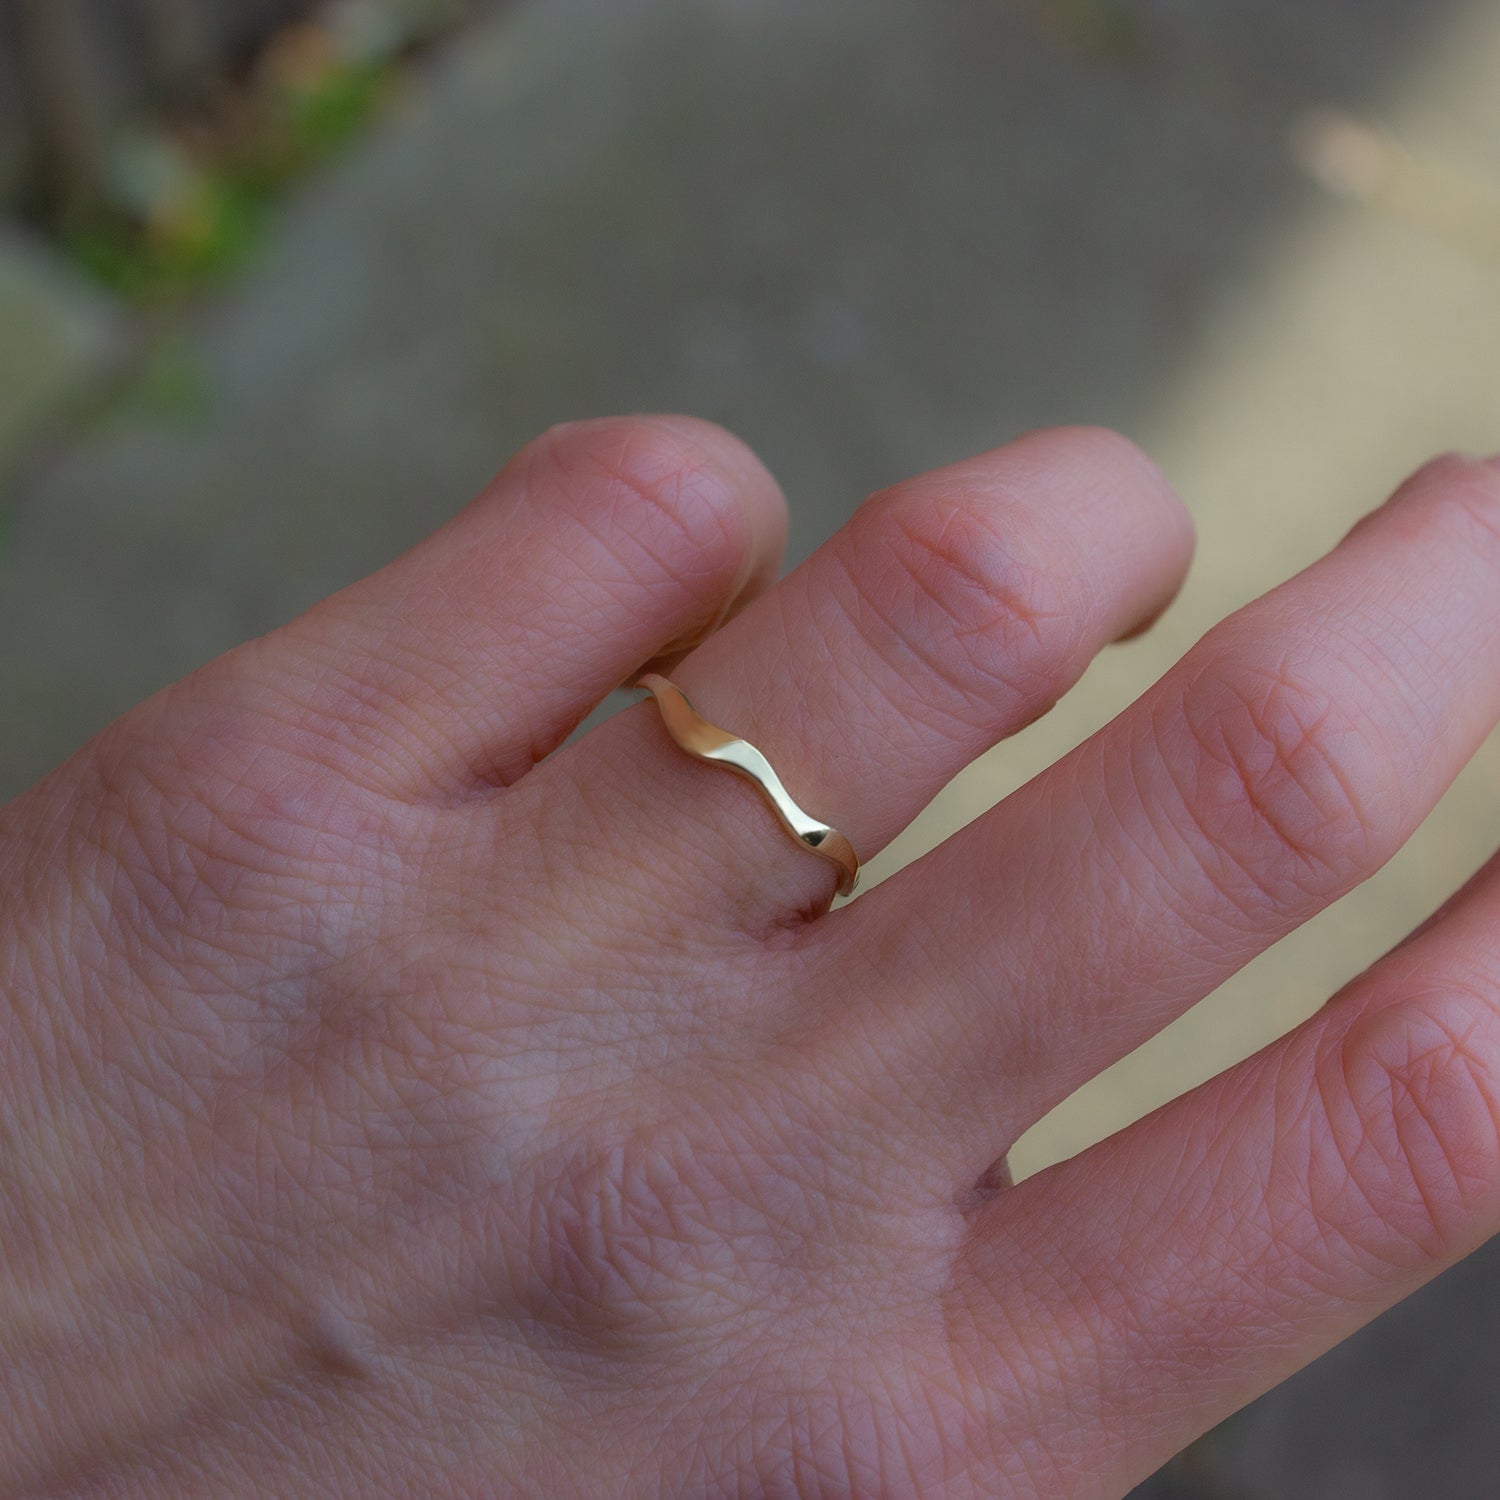 Organically shaped, flowy gold band. Perfect for stacking.